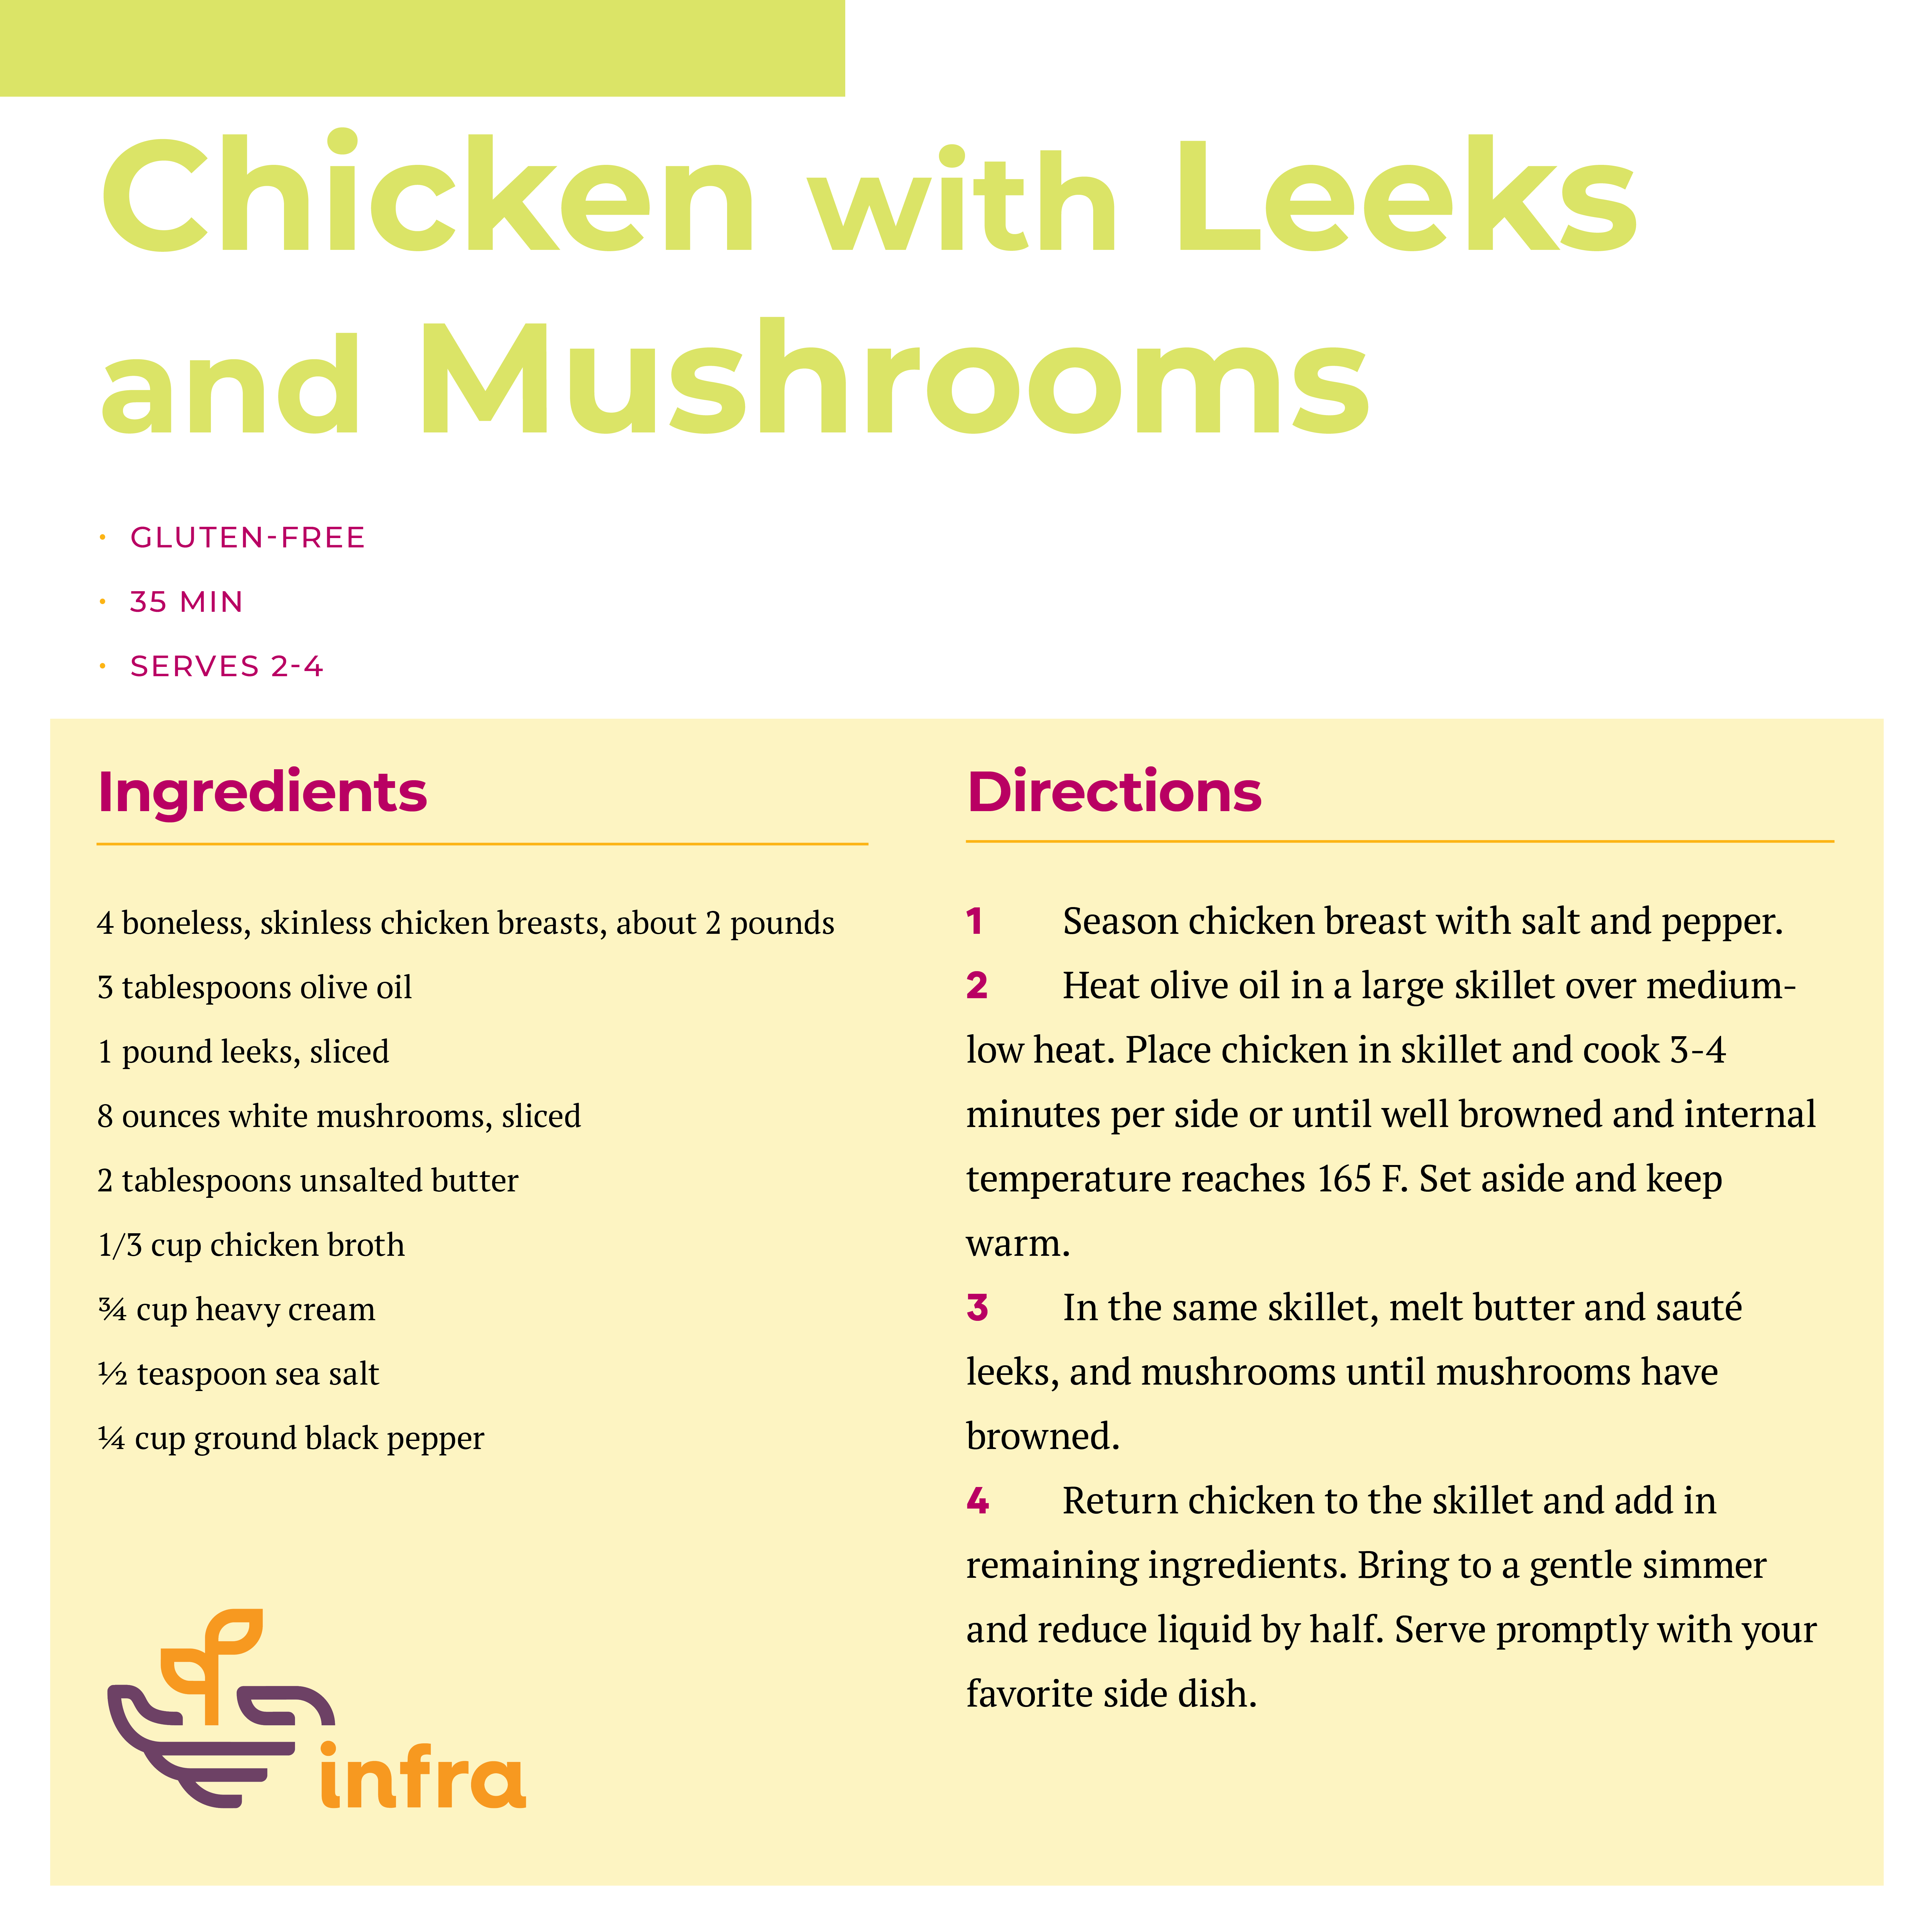 Chicken with Leeks and Mushrooms